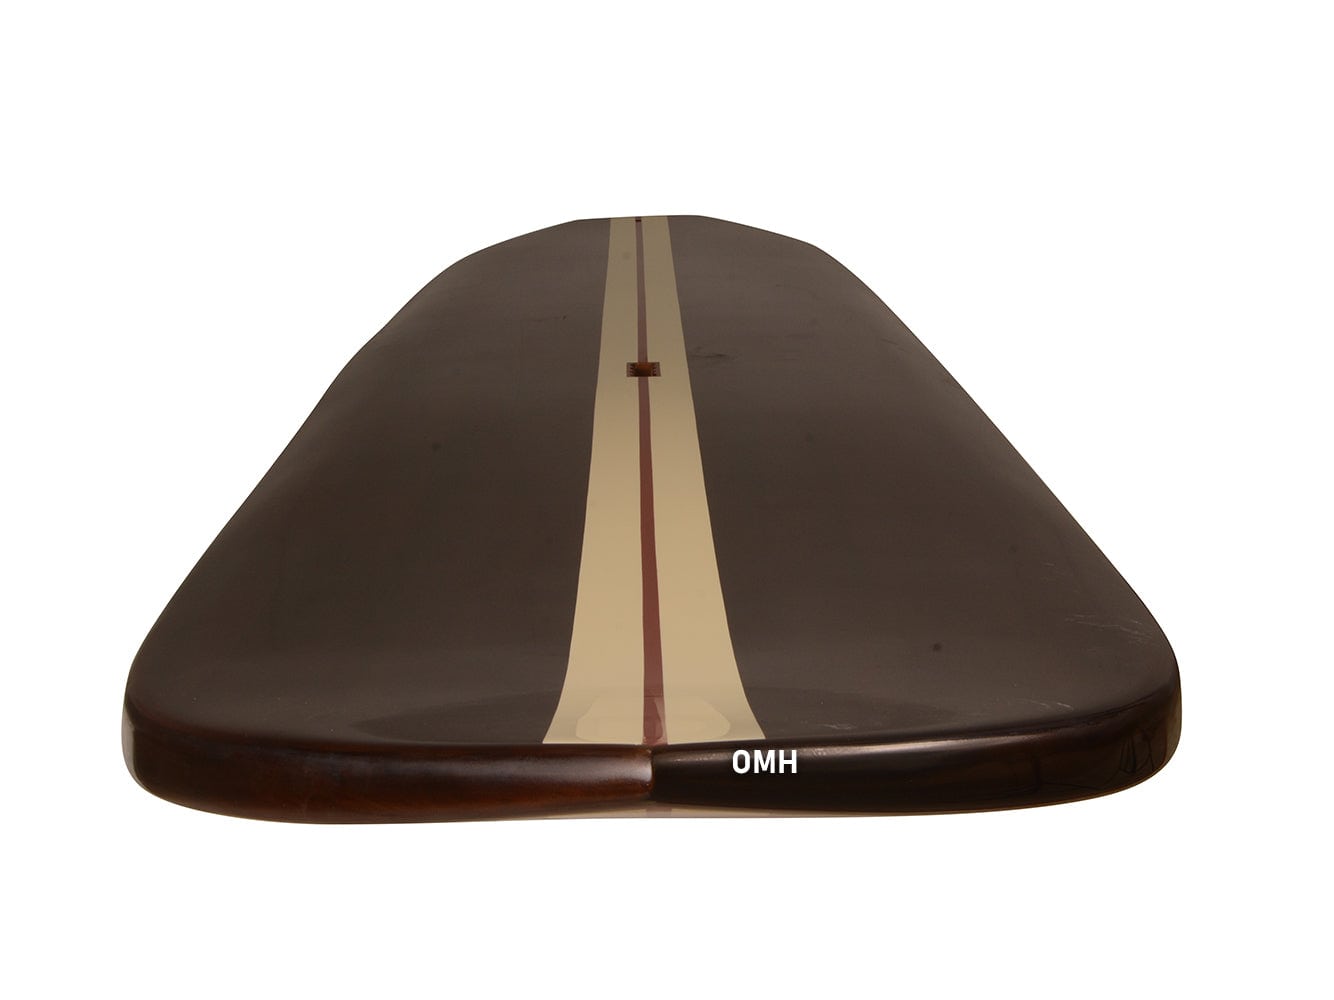 ALDO Hobbies & Creative Arts> Collectibles> Scale Model Real Fully Functional Black Paddle Board in Classic  Cedarwood 11ft with 1 fin